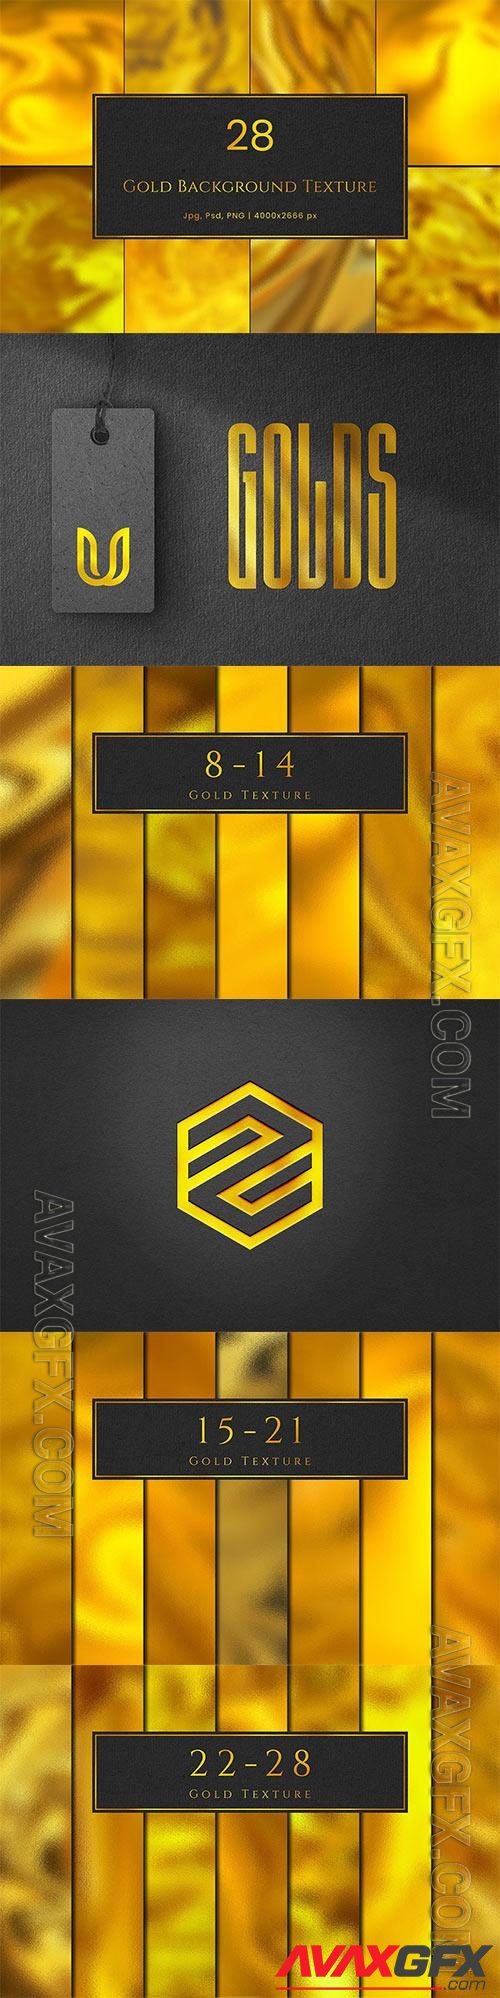 28 Gold Background Texture Psd